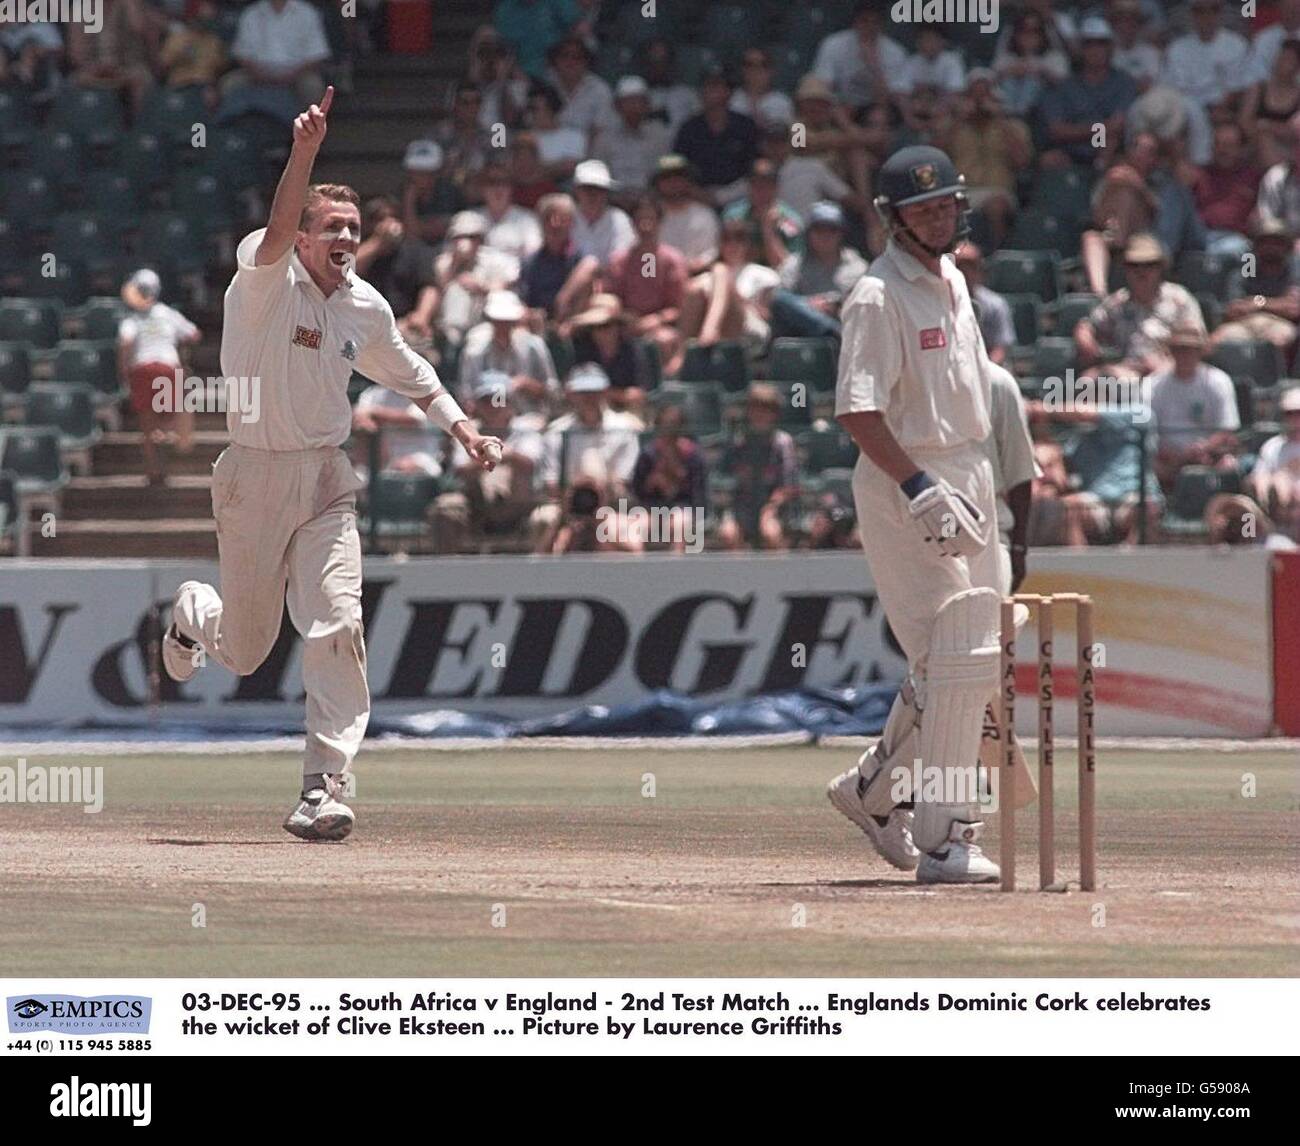 03-DEC-95 ... South Africa v England - 2nd Test Match ... Englands Dominic Cork celebrates the wicket of Clive Eksteen ... Picture by Laurence Griffiths Stock Photo